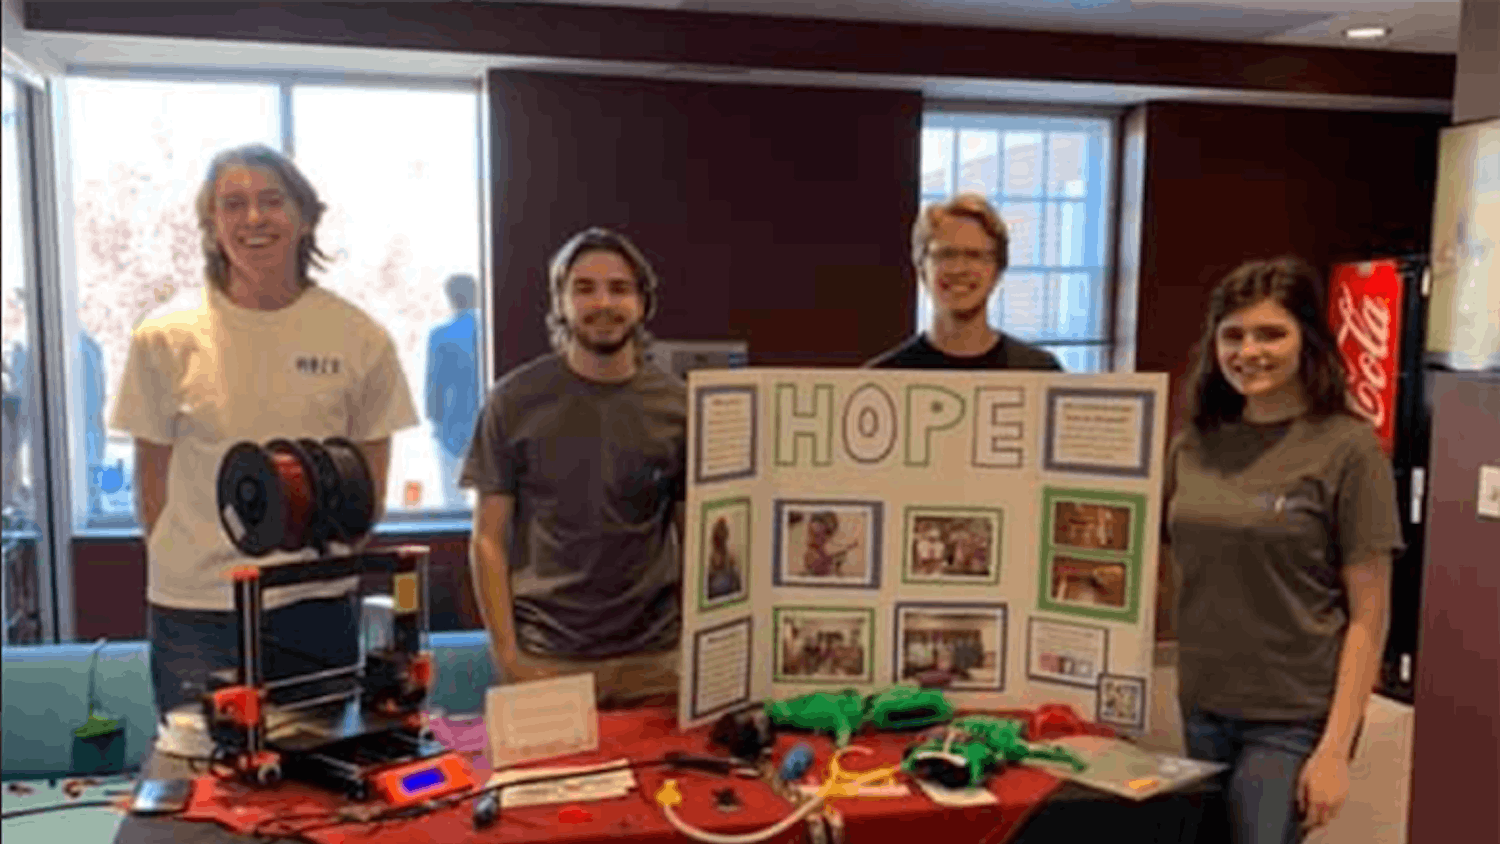 The Hands On Prosthetic Engineering organization at a table in the School of Journalism and Mass Communications. The table has an informational board, a 3D printer and examples of the organization's work.